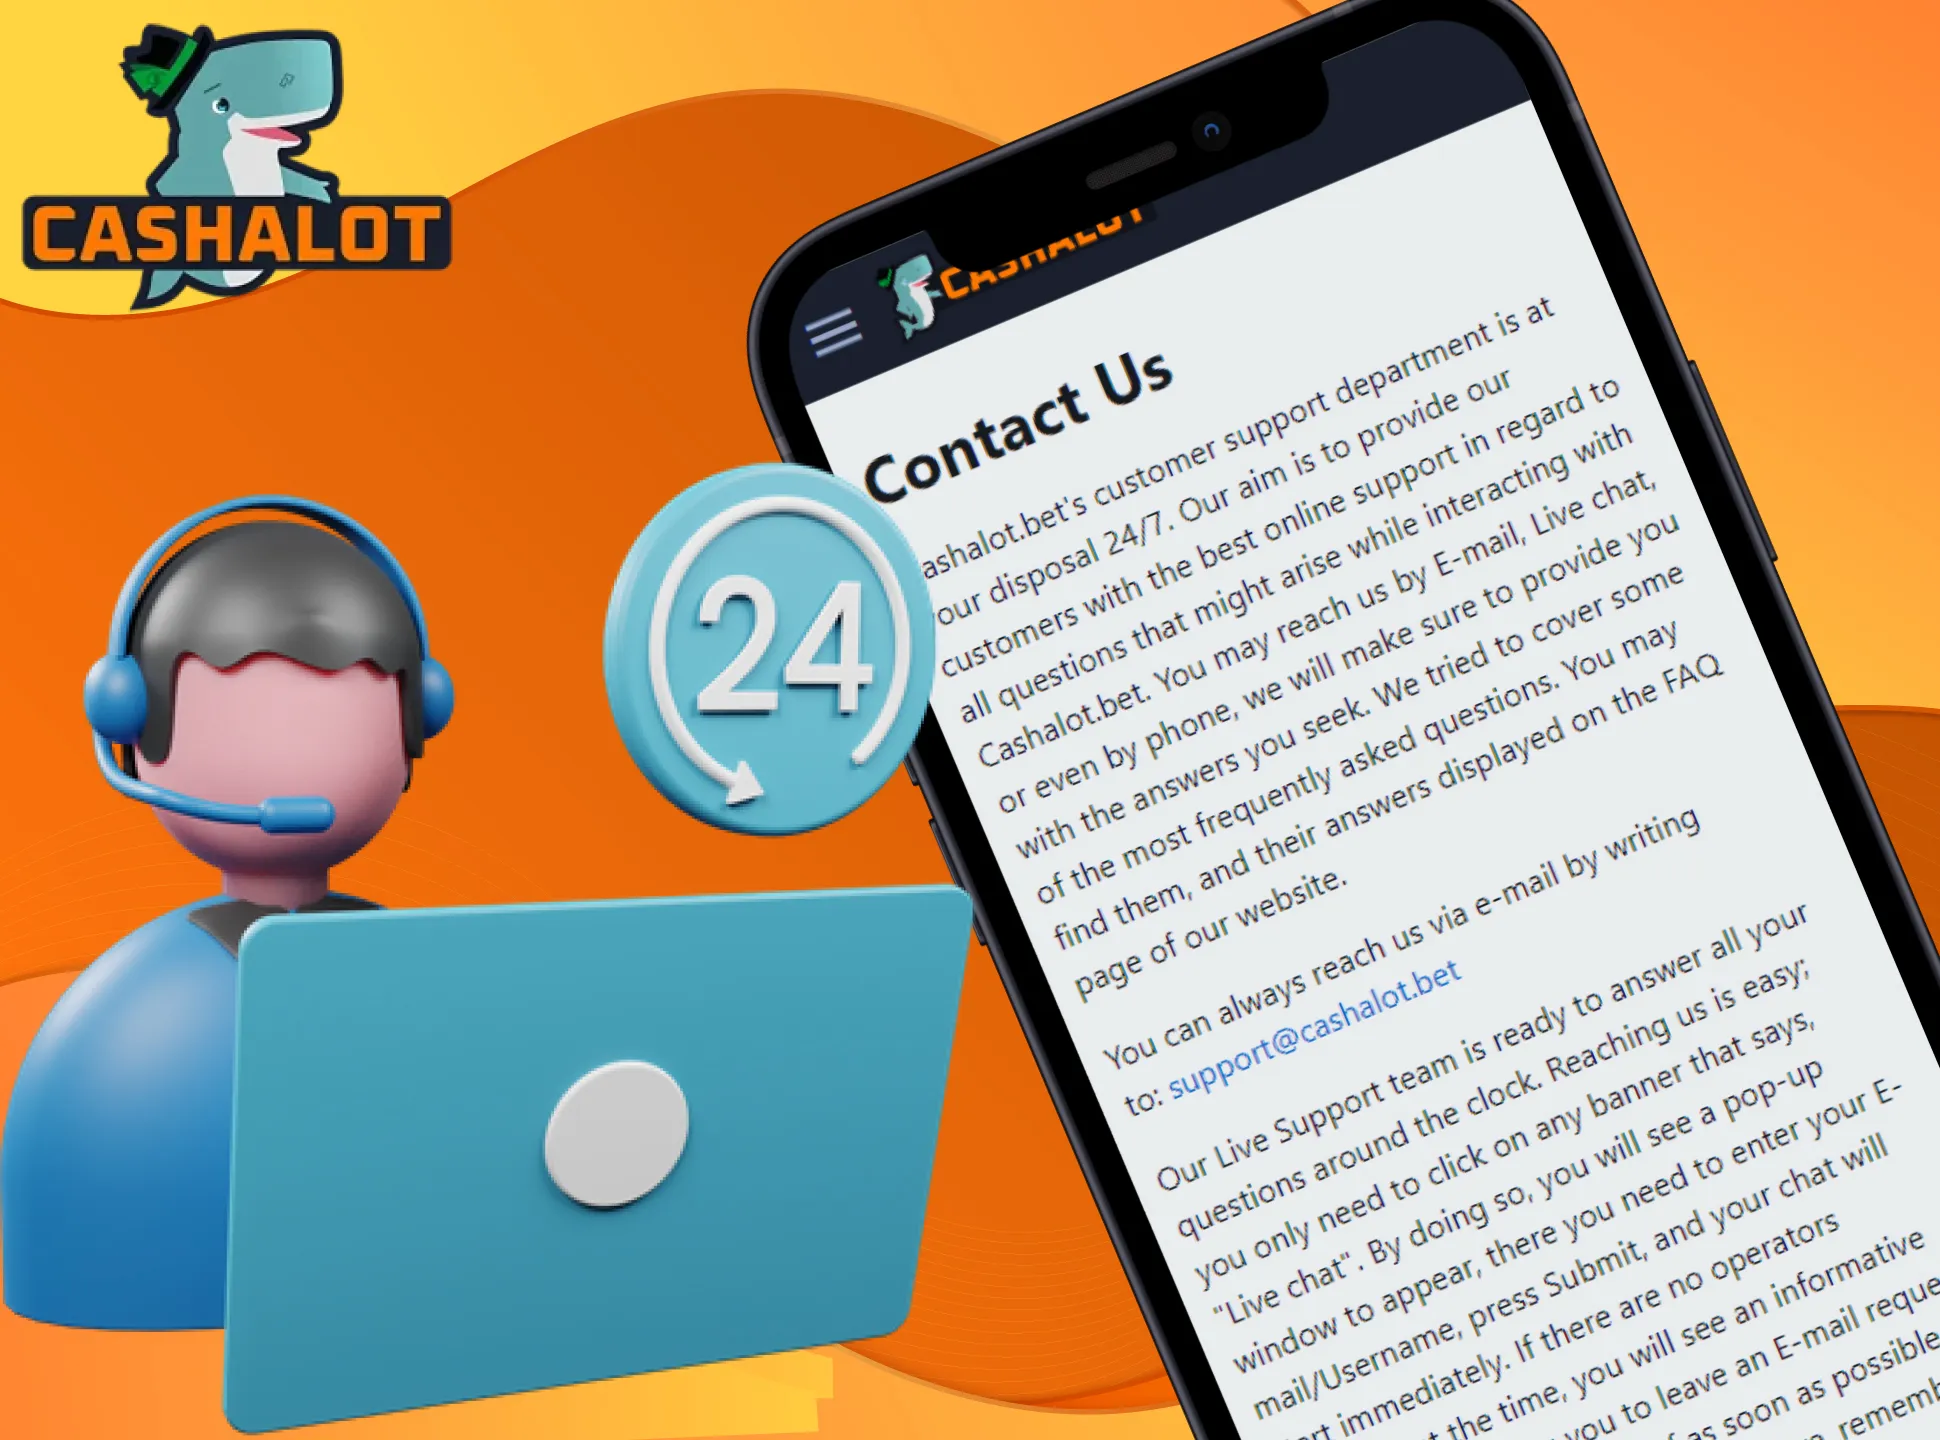 The Cashalot support team will help you with any question at any time.